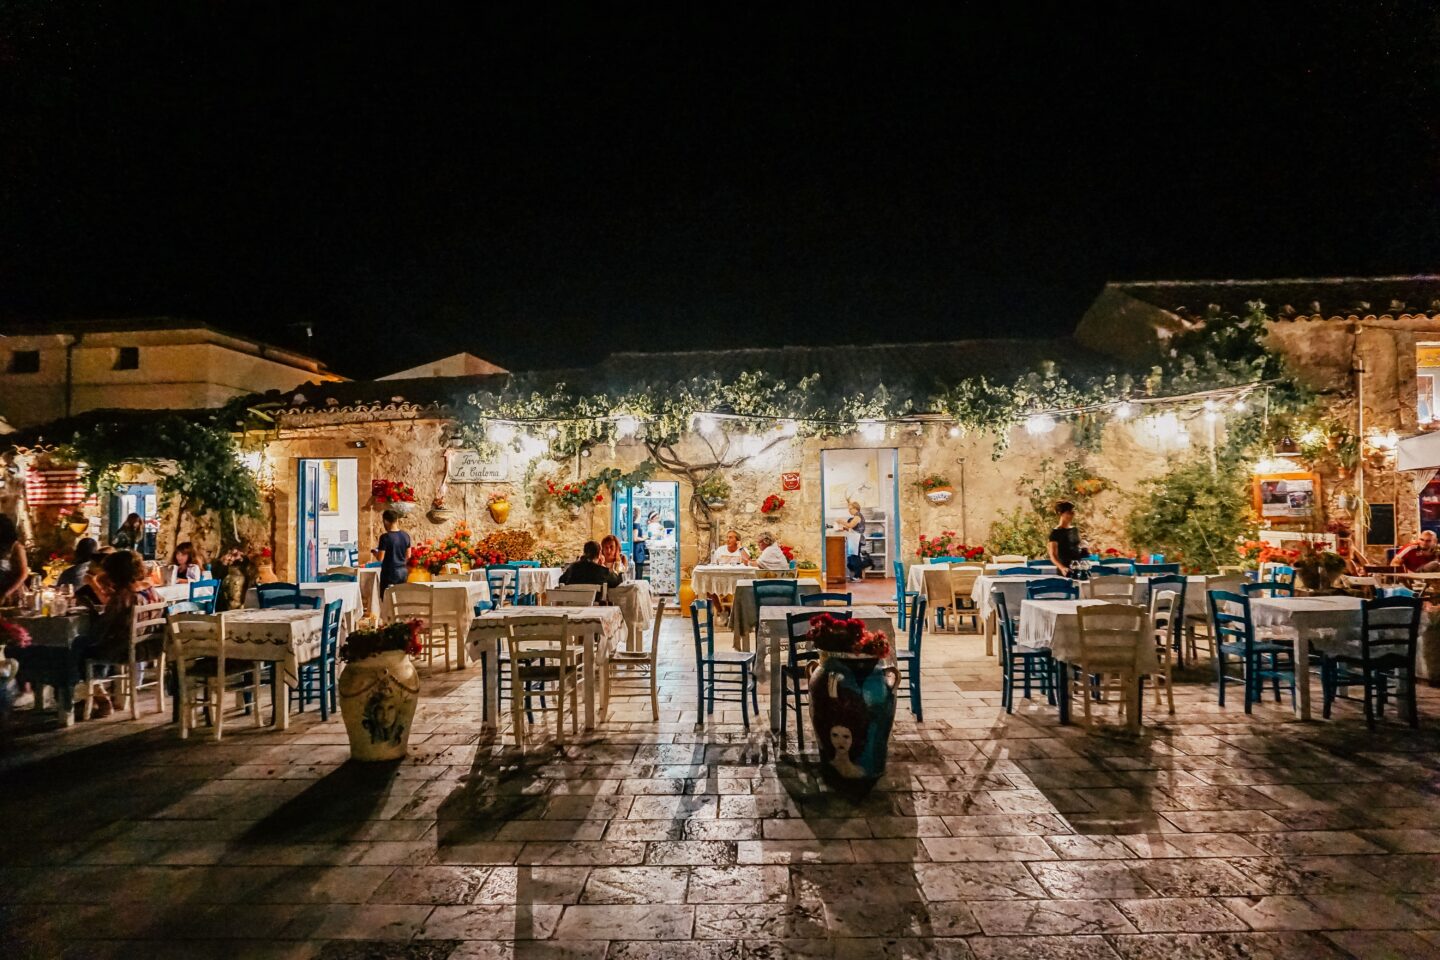 A greek looking restaurant at night time in Sicily